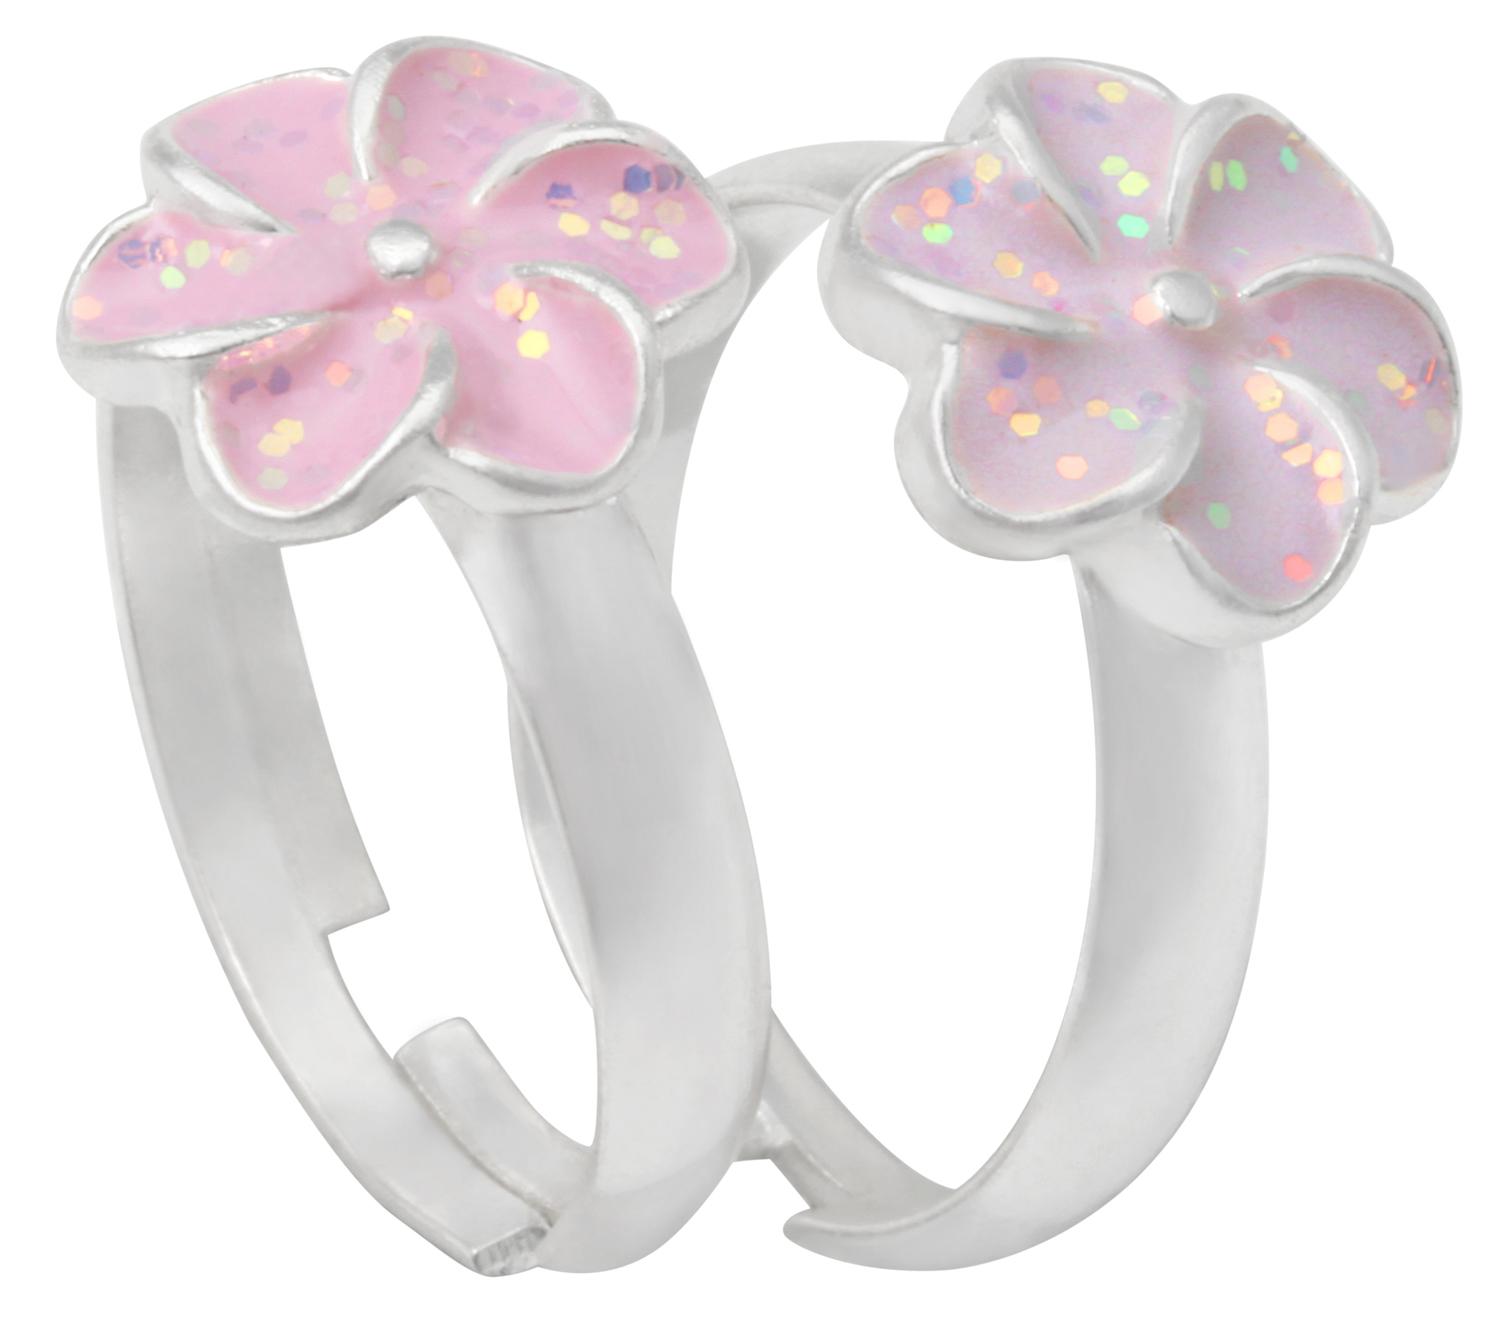 Kinder Ring - Girly Flowers